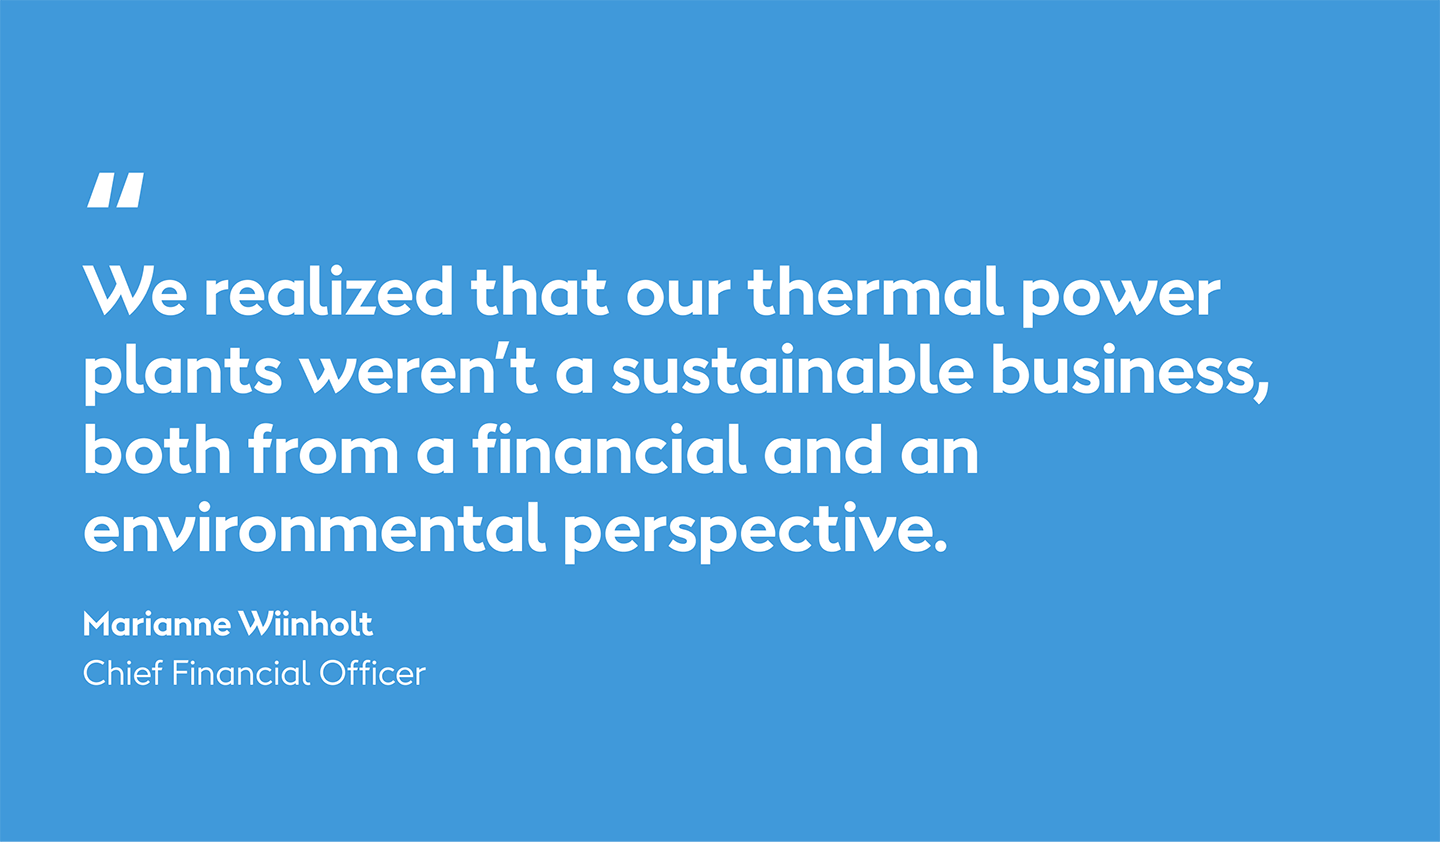 Former Ørsted CFO Marianne Wiinholt is quoted discussing the financial and environmental need to go beyond thermal power.